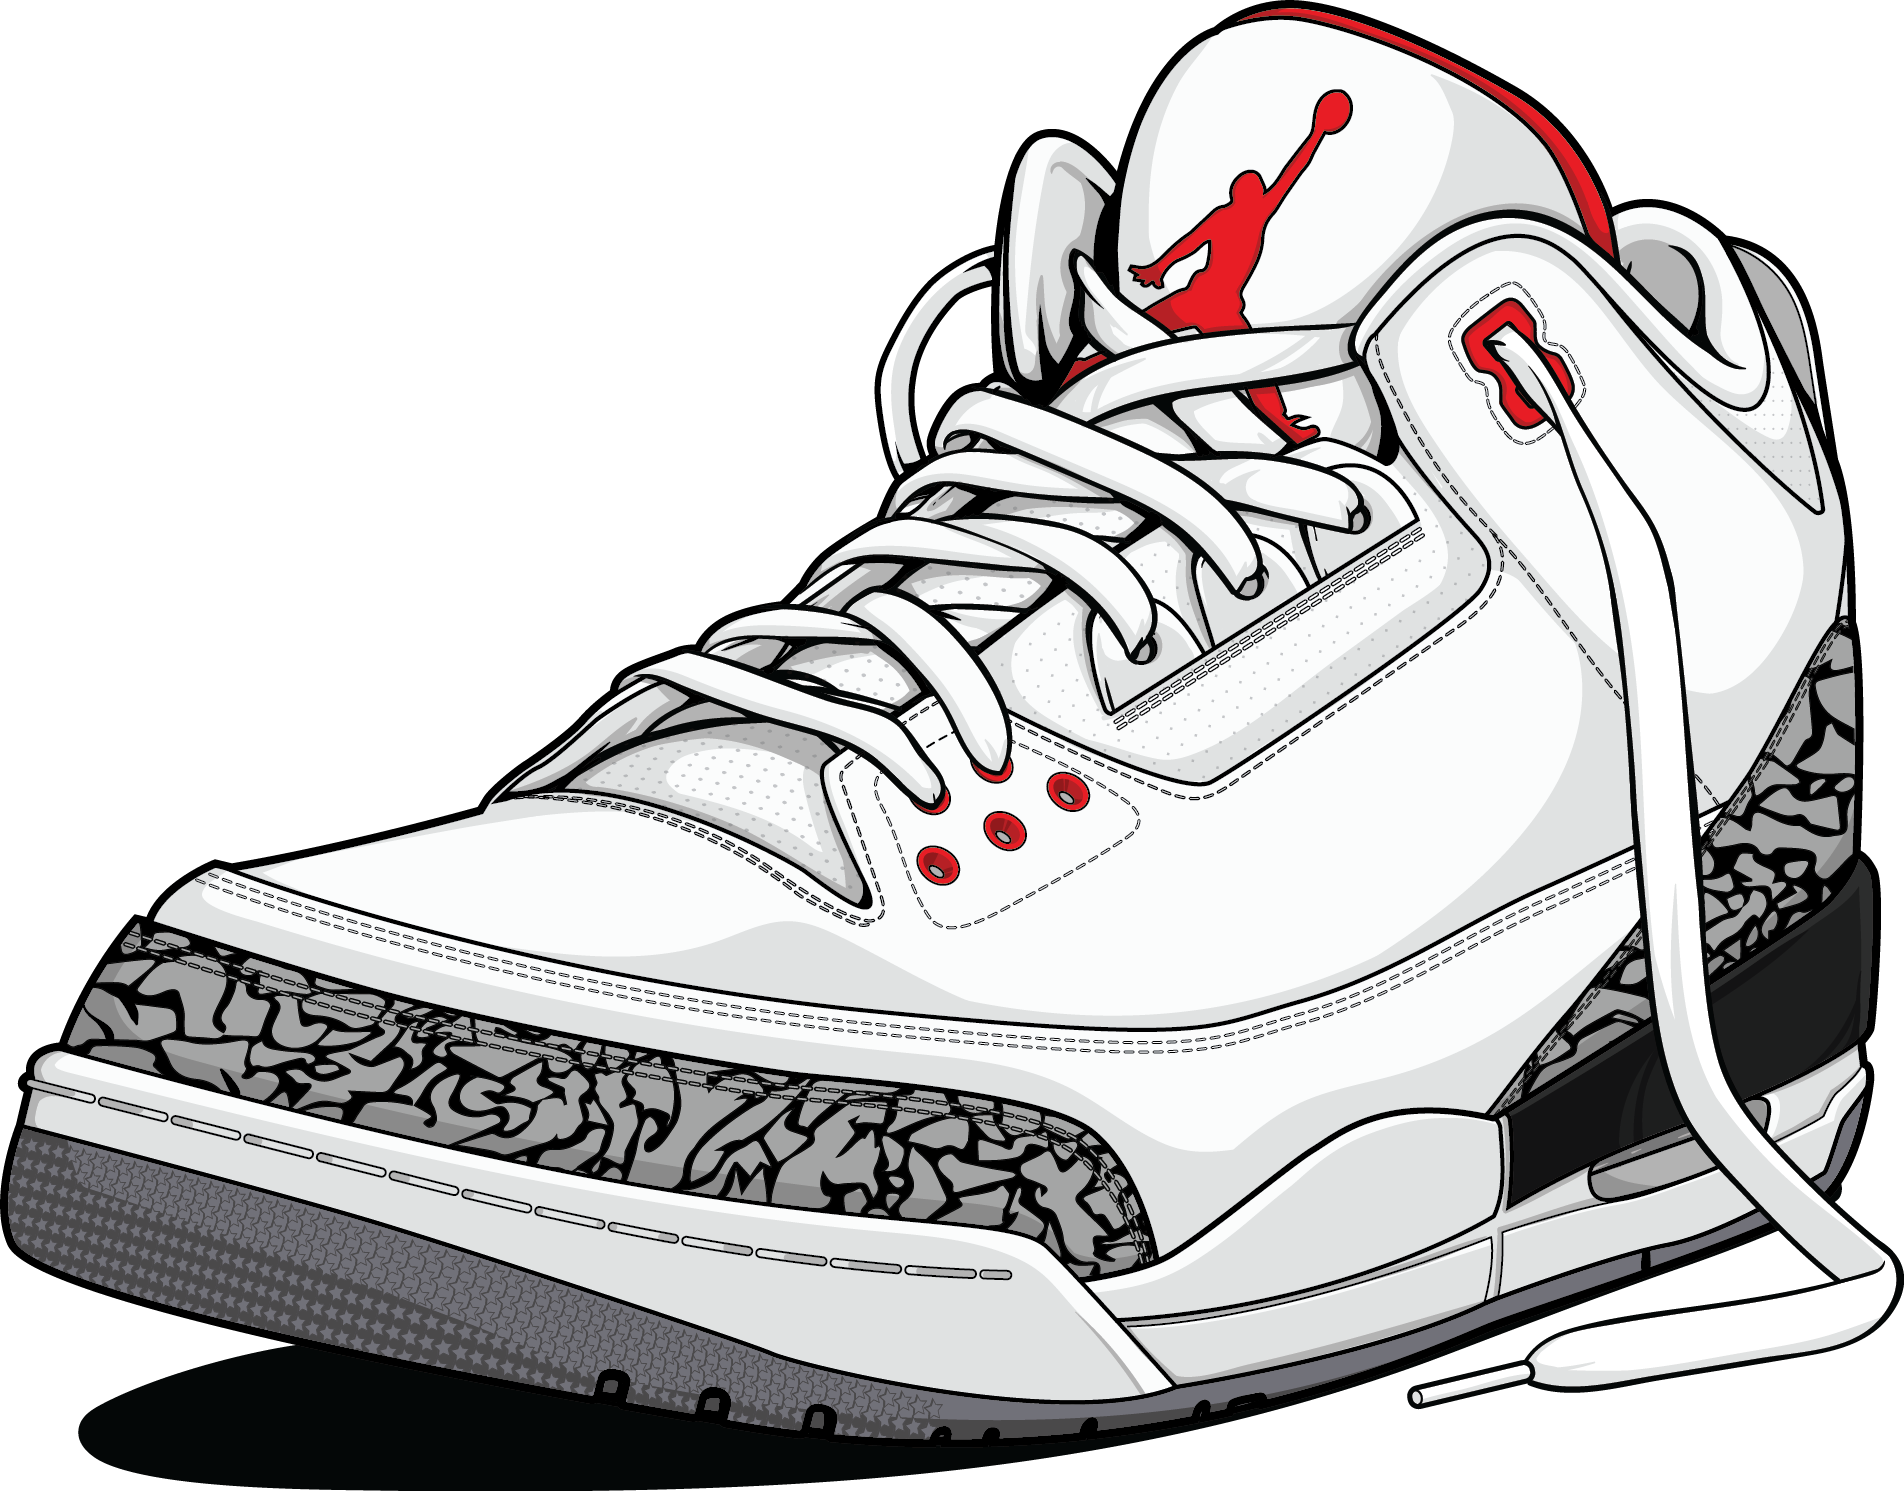 Download and share clipart about An Ode To The Iconic Ad Campaigns For Air Jordan...